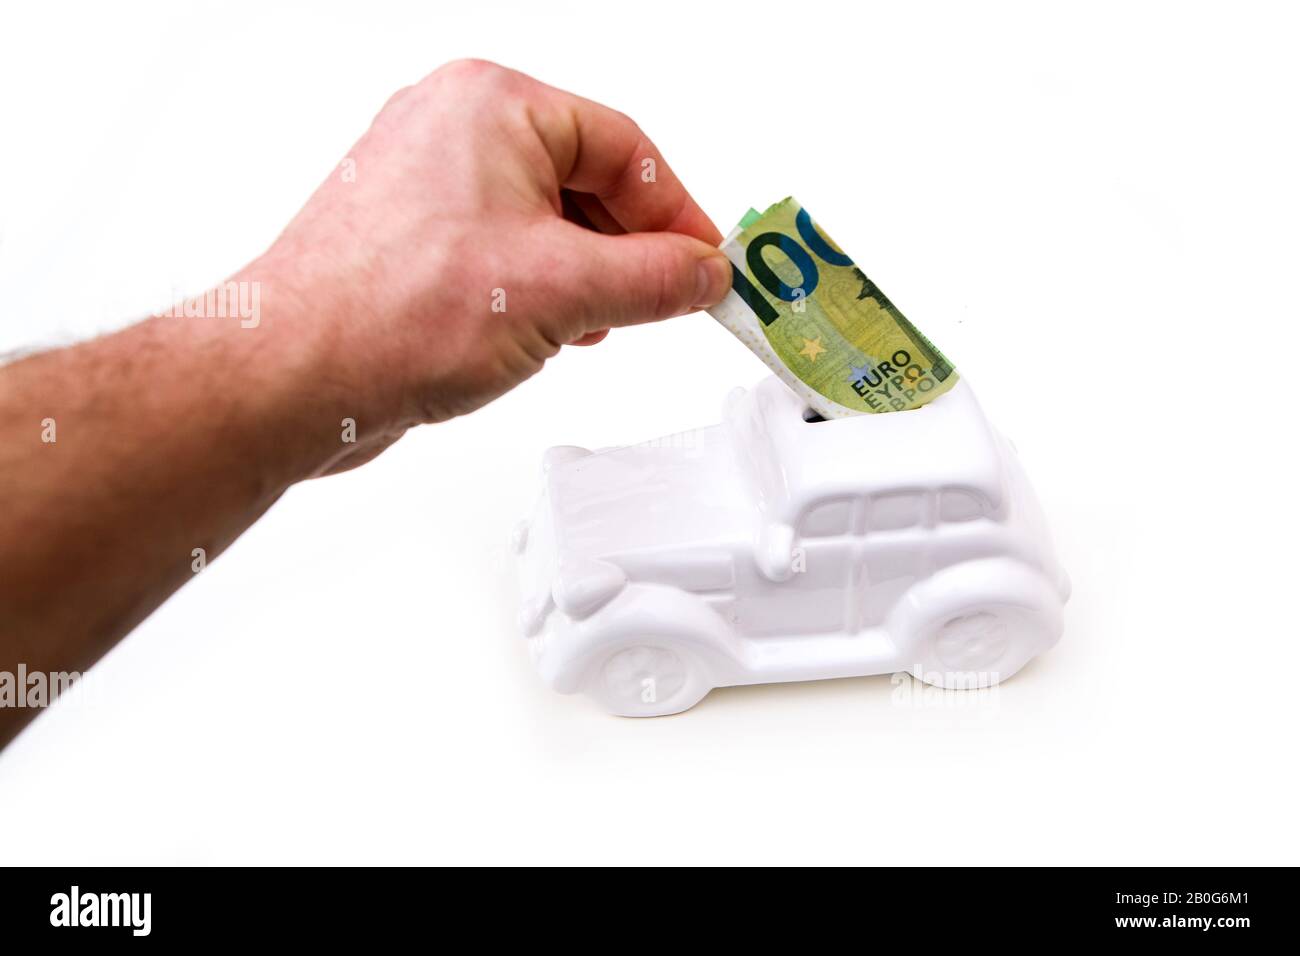 The hand is puting a banknote into the ceramic car shaped money box. It can be symbol for costs for car´s repairs, investment, savings or insurance. Stock Photo